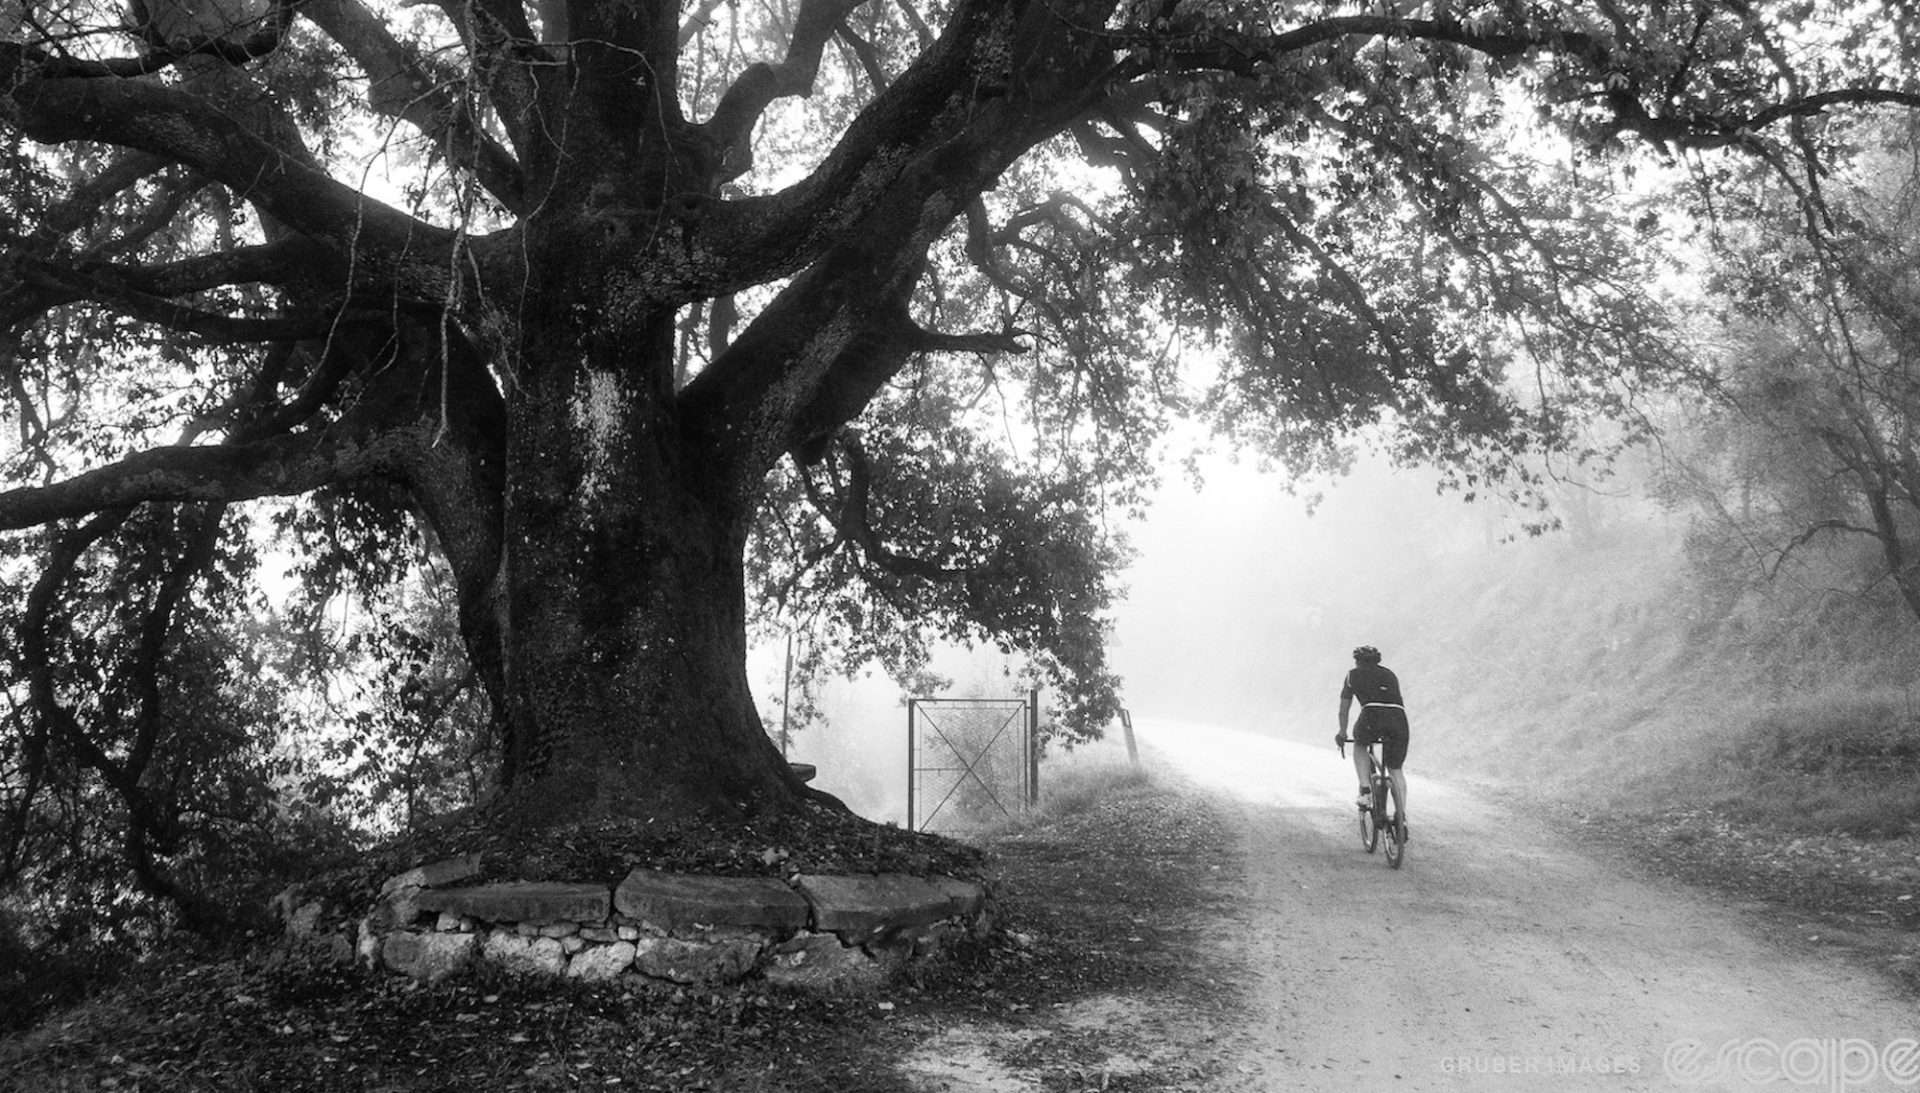 A lone rider climbs a dirt road past a large, gnarled tree. The rider is heading toward a kind of fogbank or mist, it's hard to tell which on a black and white shot.